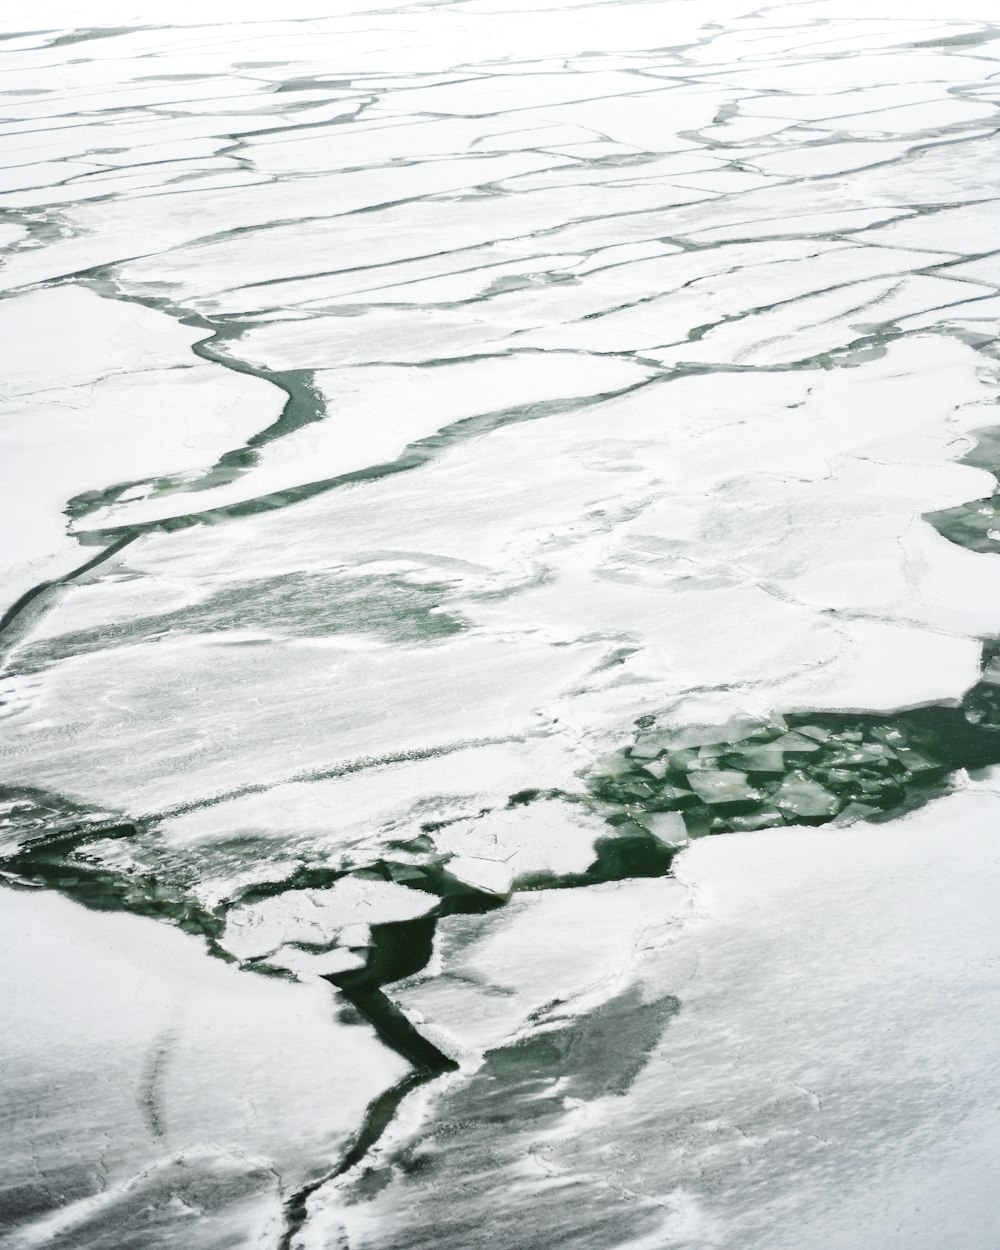 an aerial view of ice floes and water